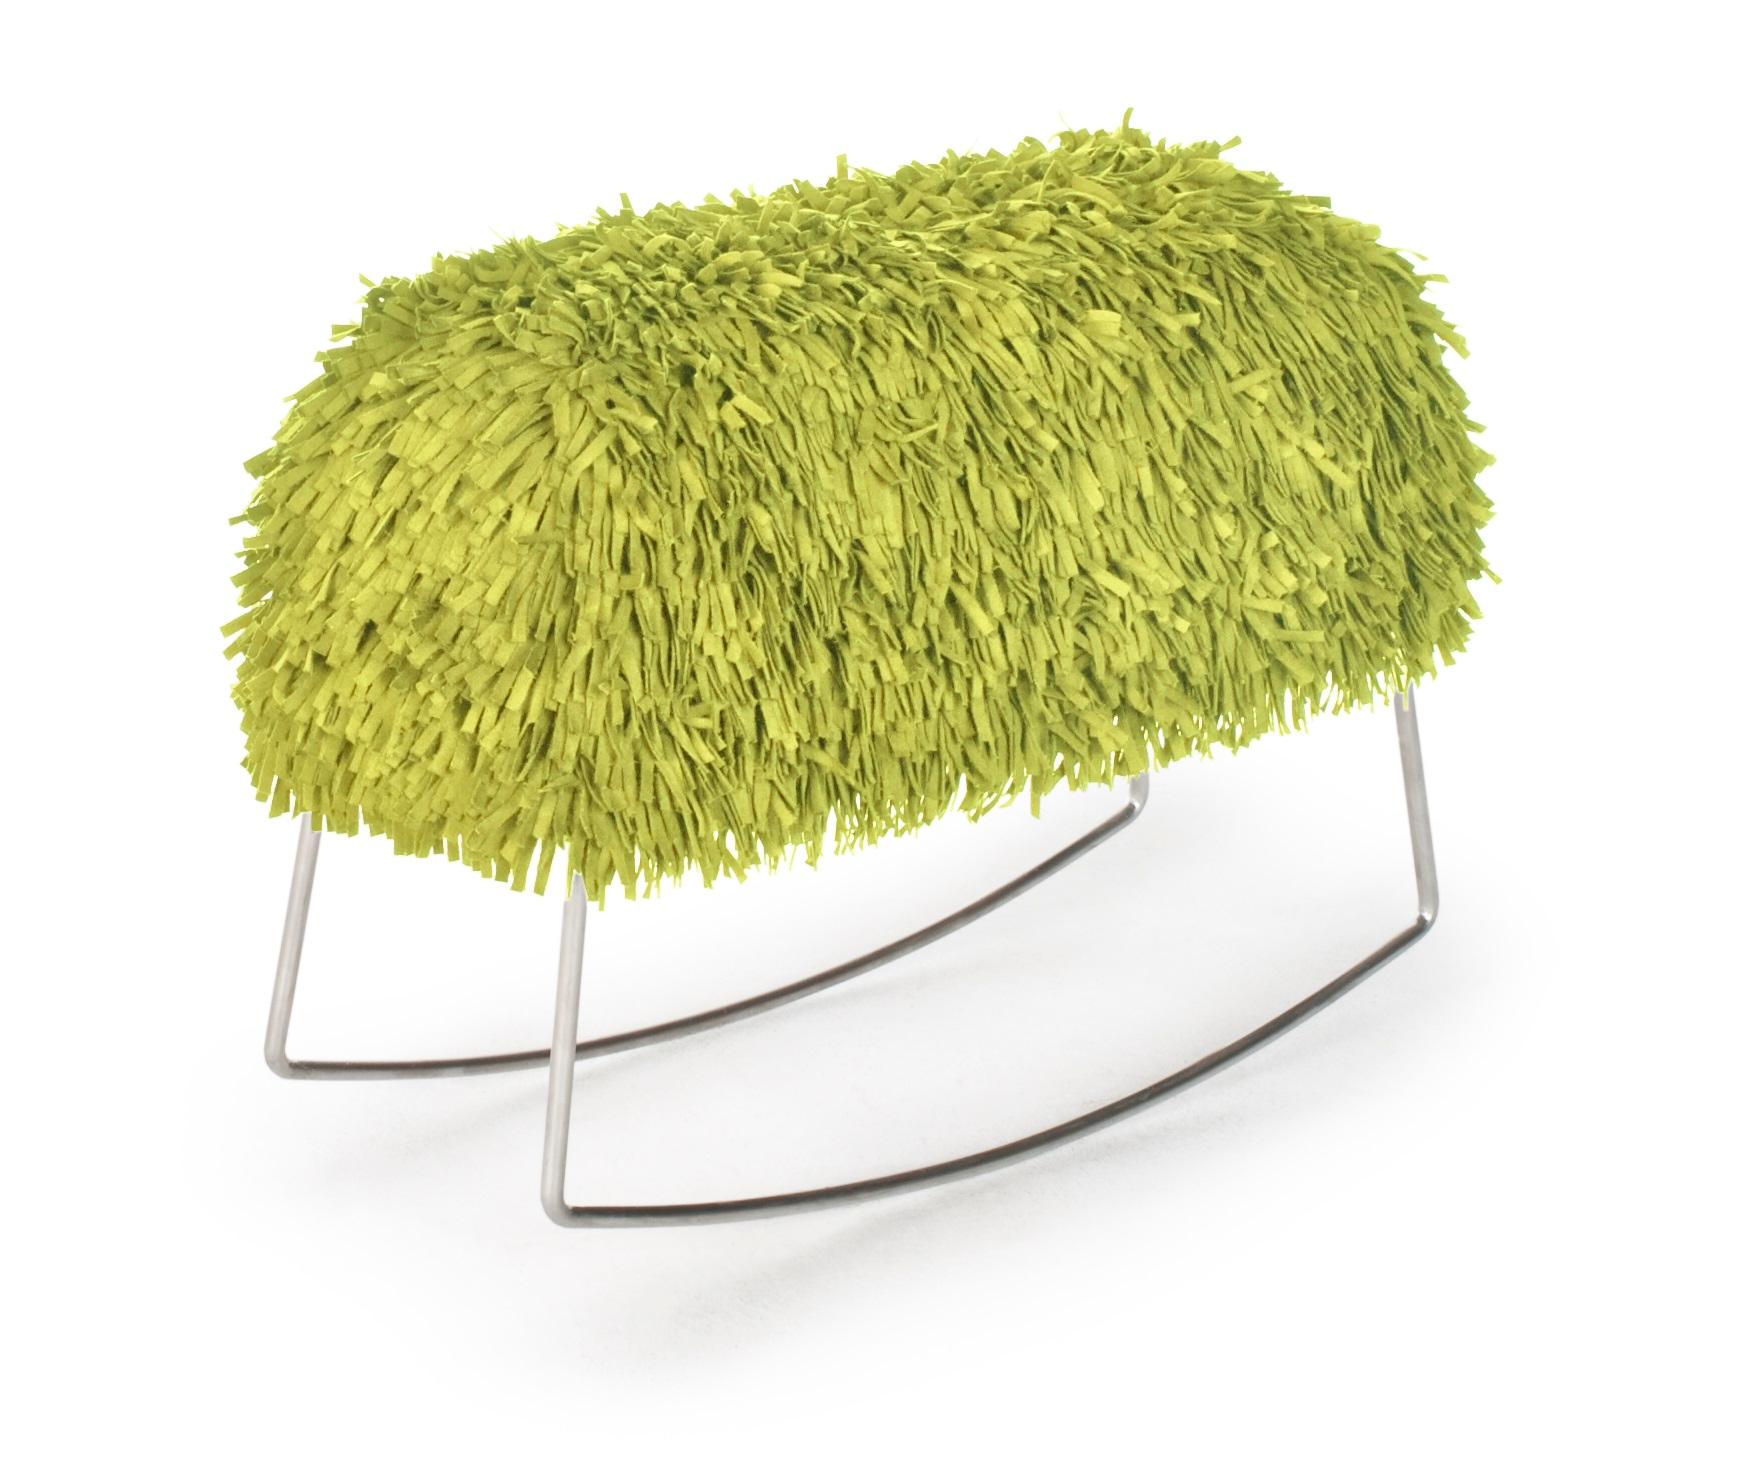 Lime green harry rocking chair by Kenneth Cobonpue
Materials: Microfiber, urethane foam, stainless steel, plywood.
Also available in other colors.
Dimensions: 28cm x 67cm x H 55cm

Harry brings the fun of the outdoors inside with its bright,